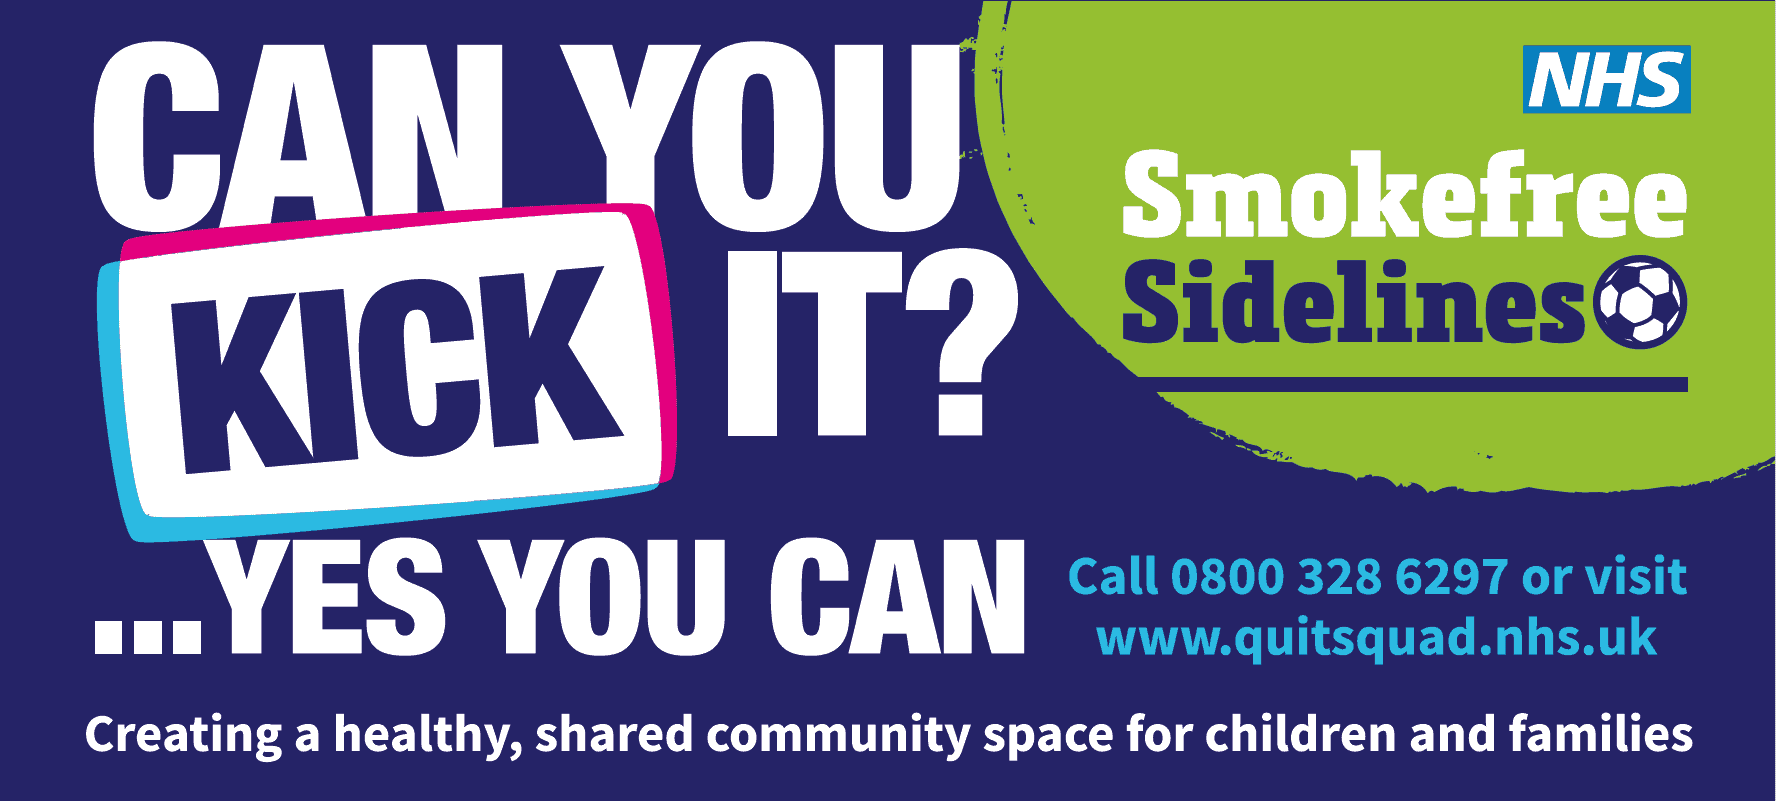 Can you kick it? Quit Squad Smokefree Sidelines